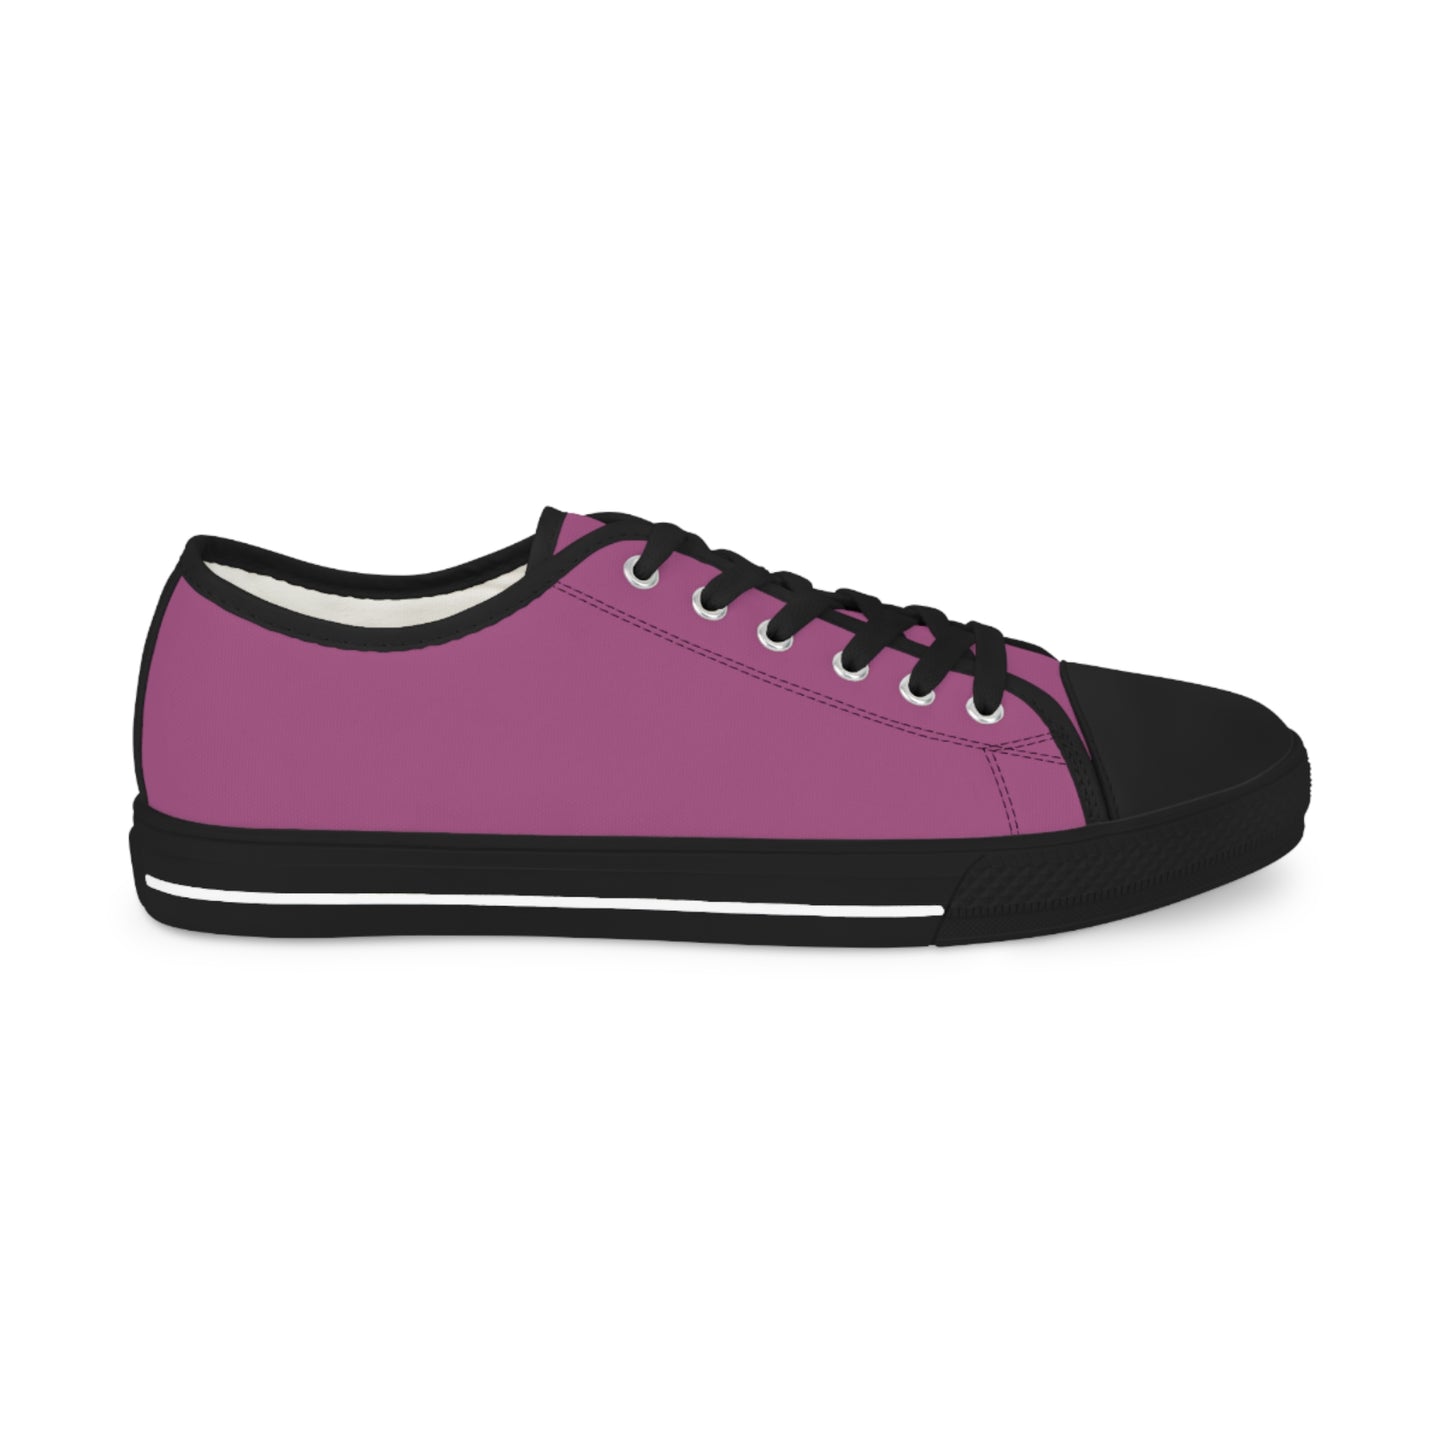 Men's Canvas Low Top Solid Color Sneakers - Candy Wrapper Pink US 14 Black sole